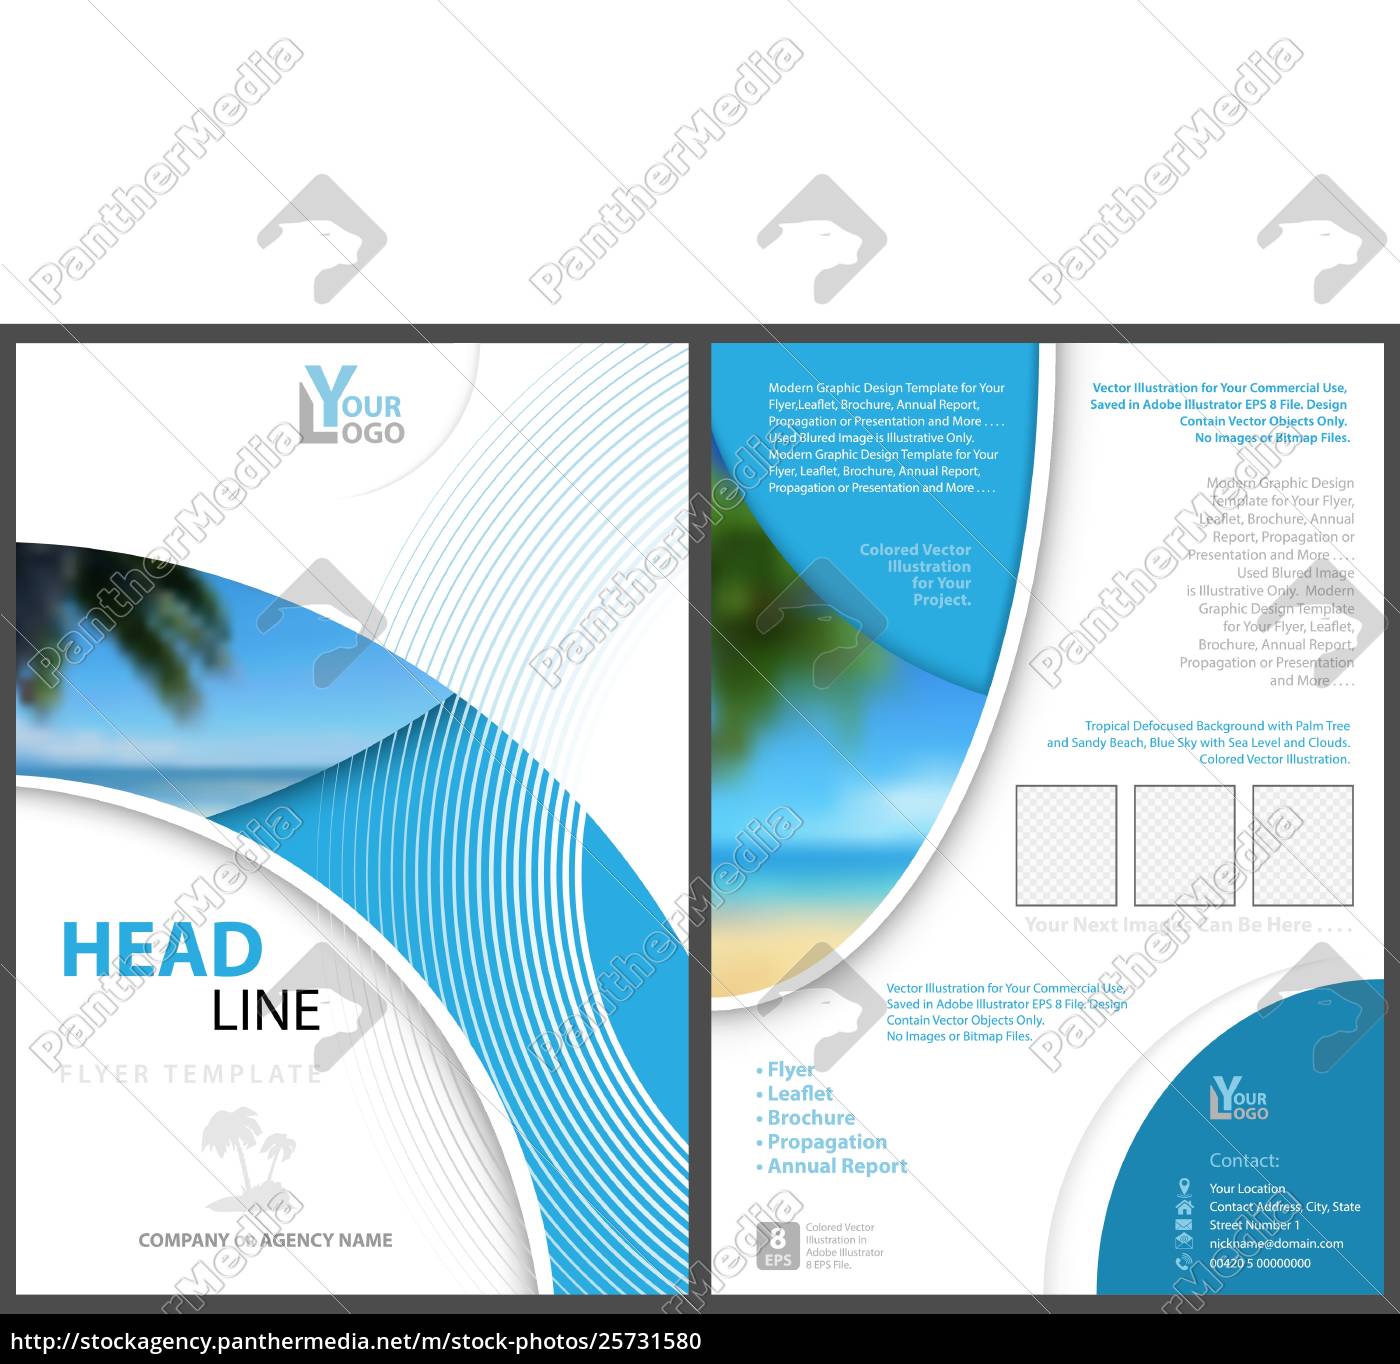 Elegant Flyer Template With Geometric Shapes Royalty Free Photo Panthermedia Stock Agency